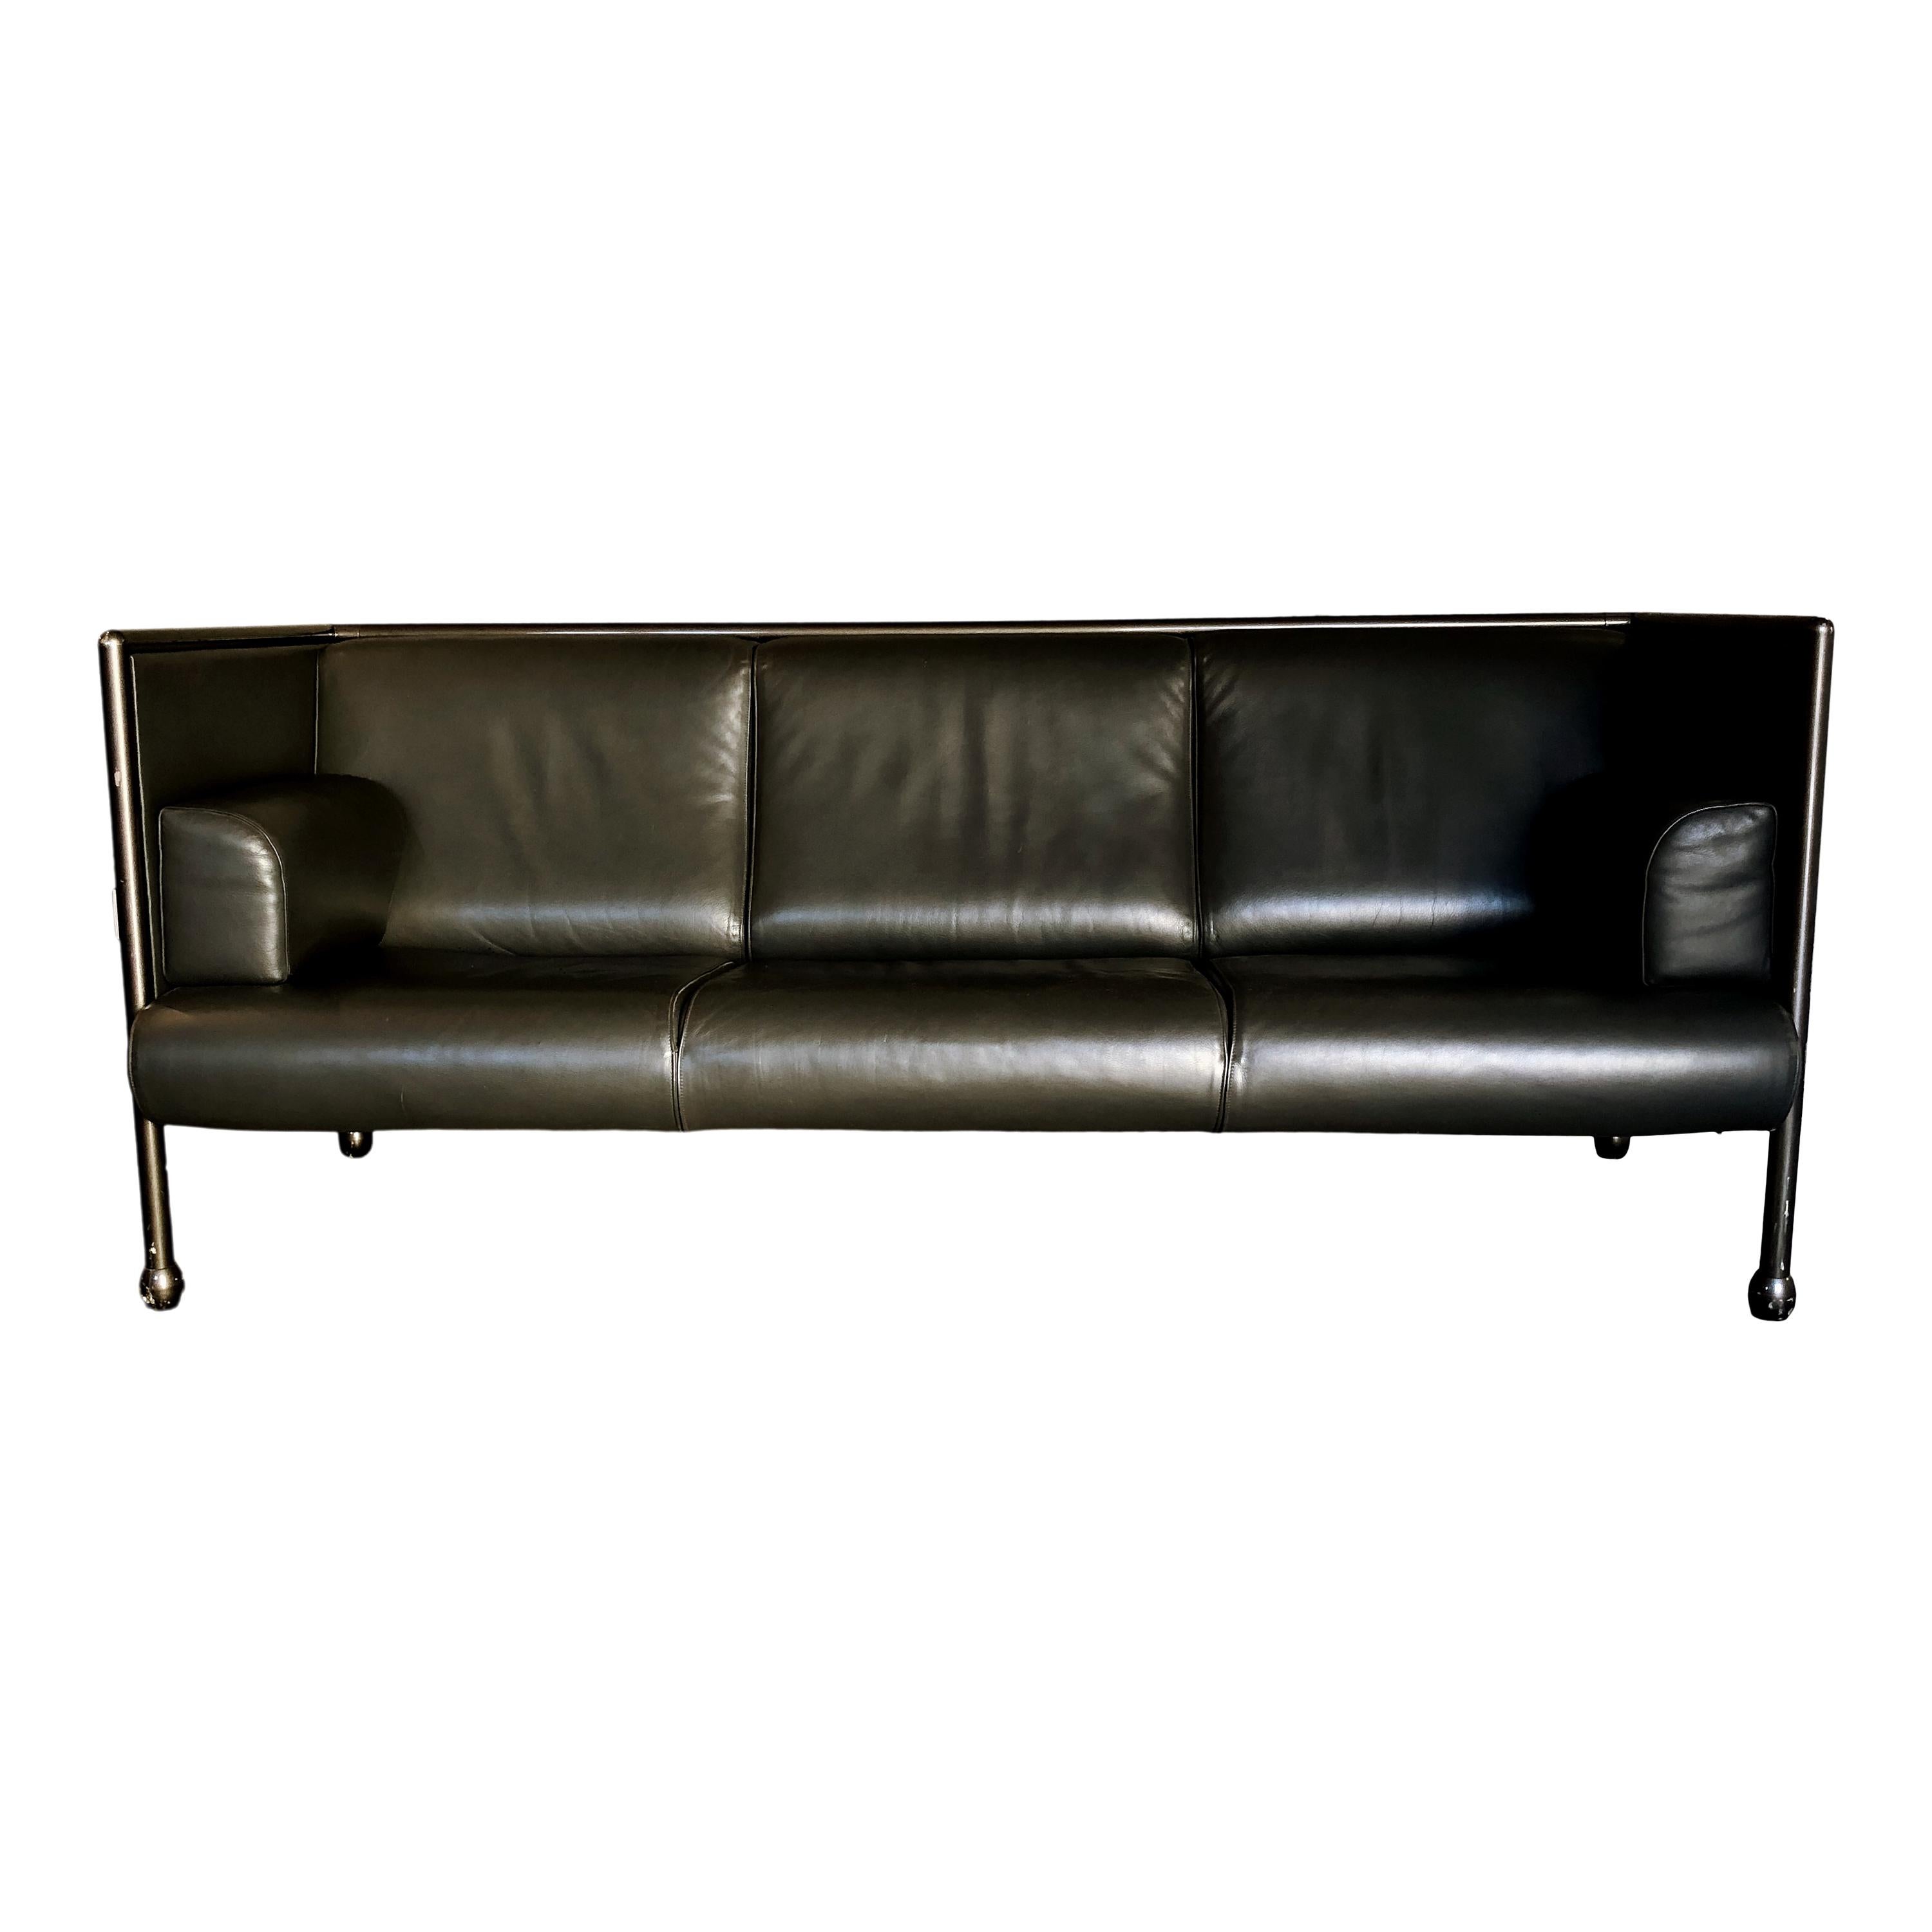 Danube sofa Model 850, three-seat, designed by Ettore Sottsass for Cassina. Iron structure covered with red cloth. Original black leather seat. Very good condition.

The 